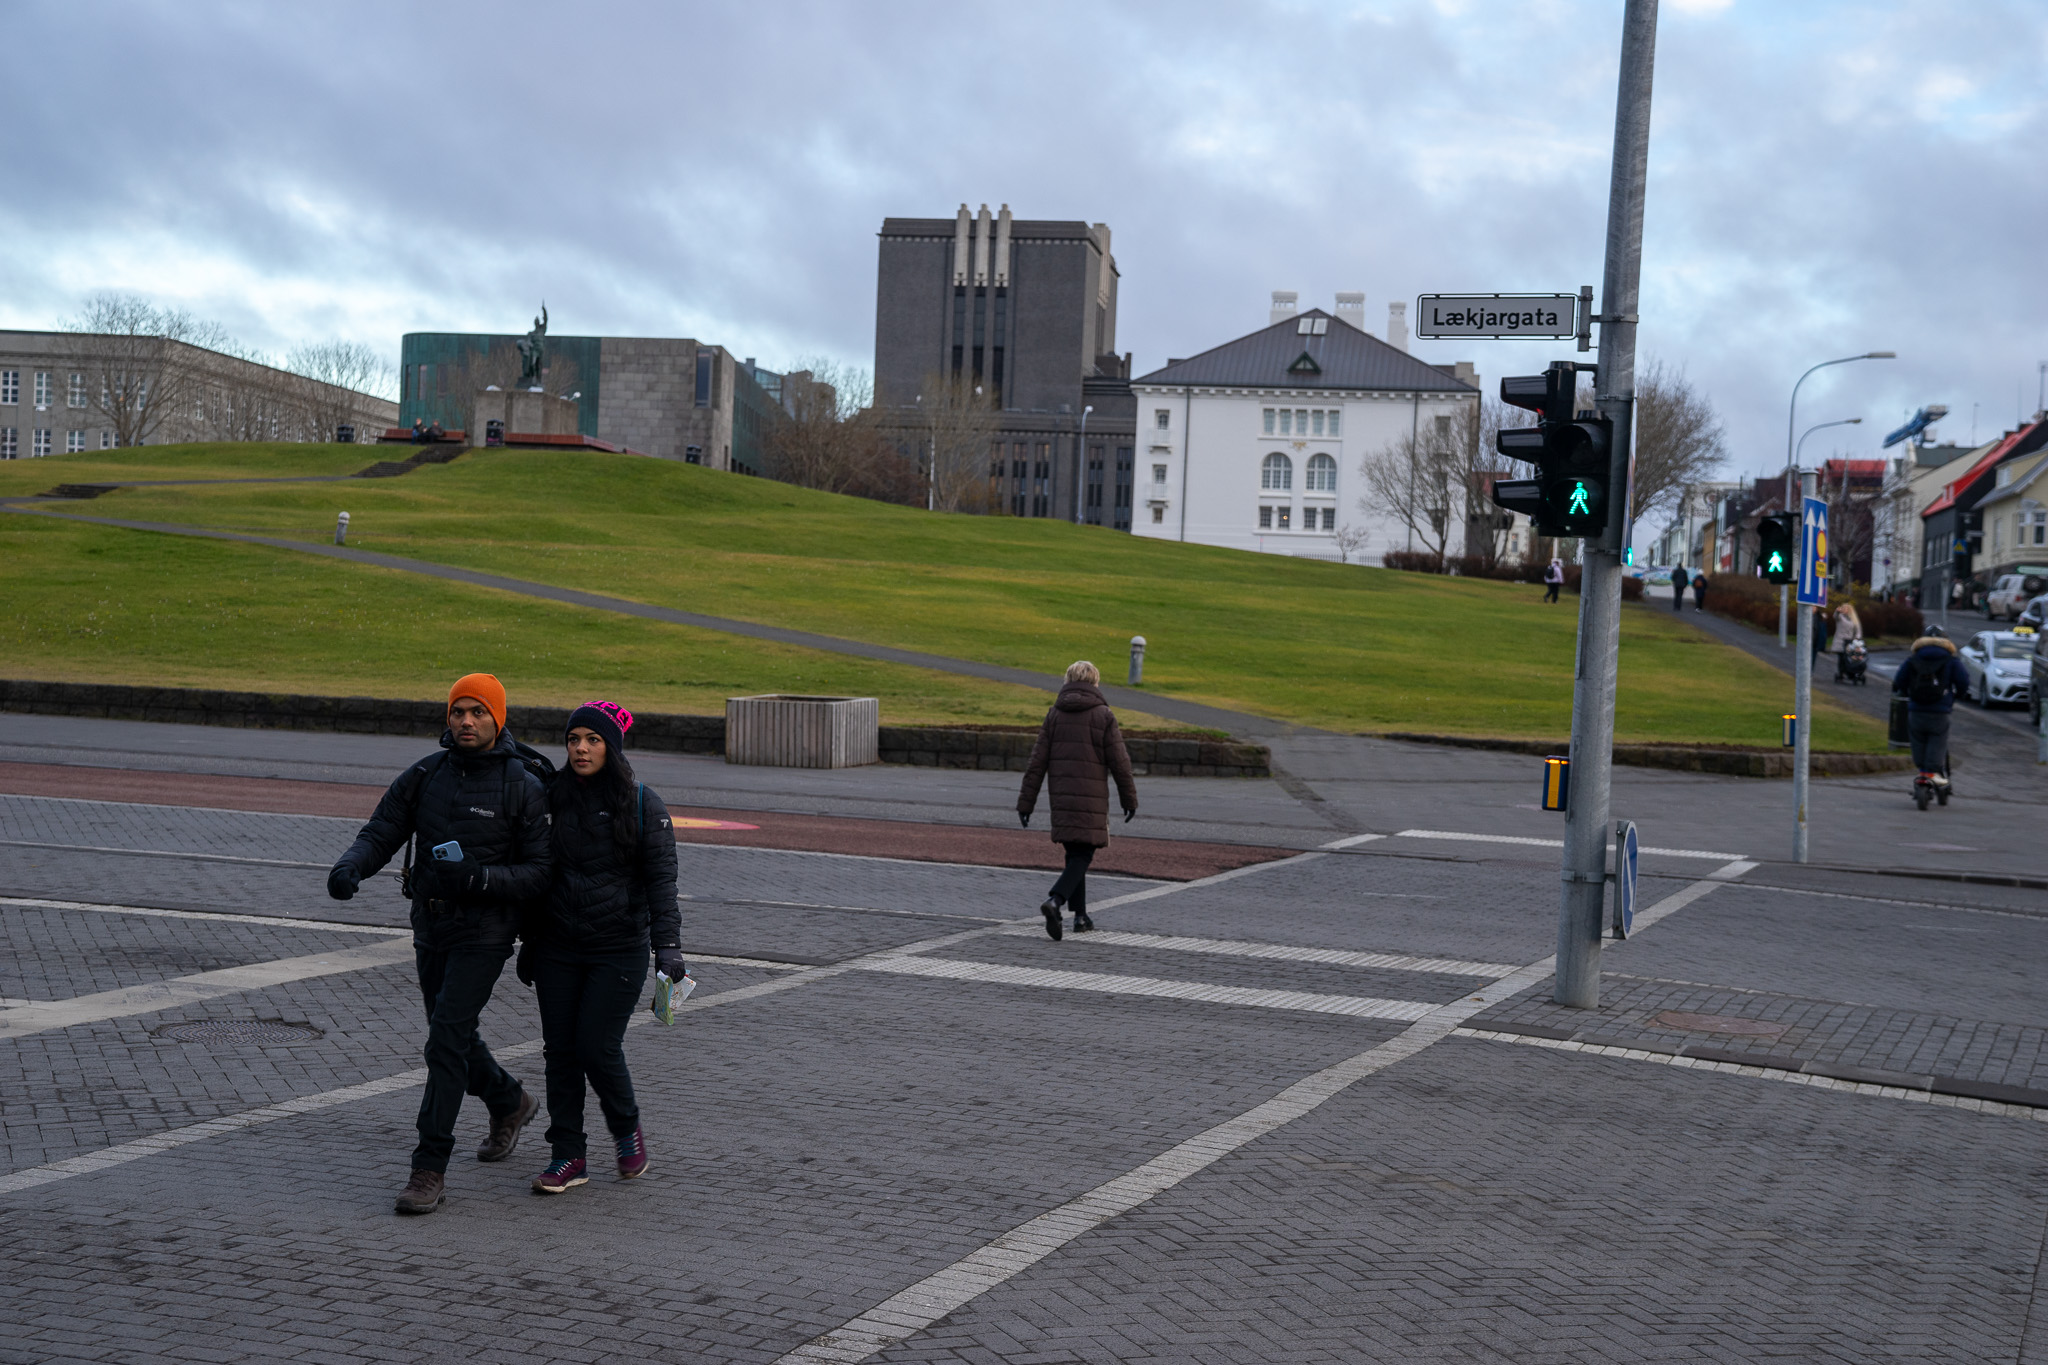 Central Reykjavik, from one end to the other, is about 3km by foot 